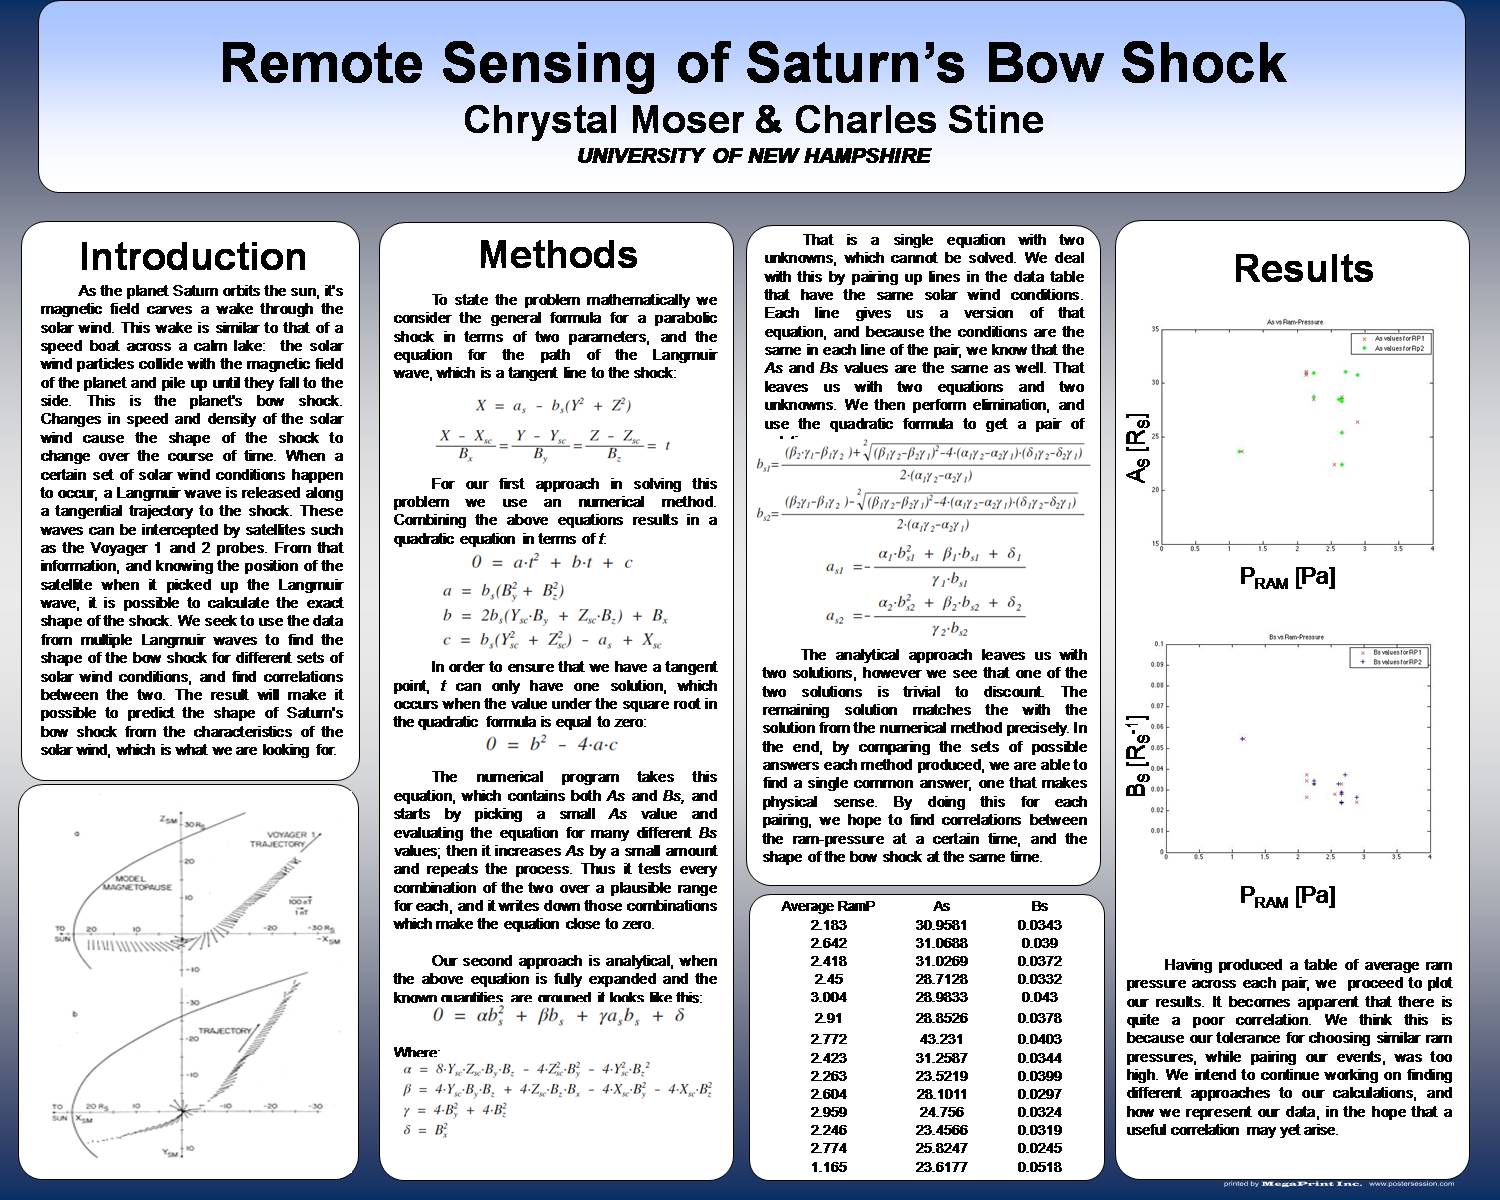 Remote Sensing Saturn's Bowshock by CWSmith